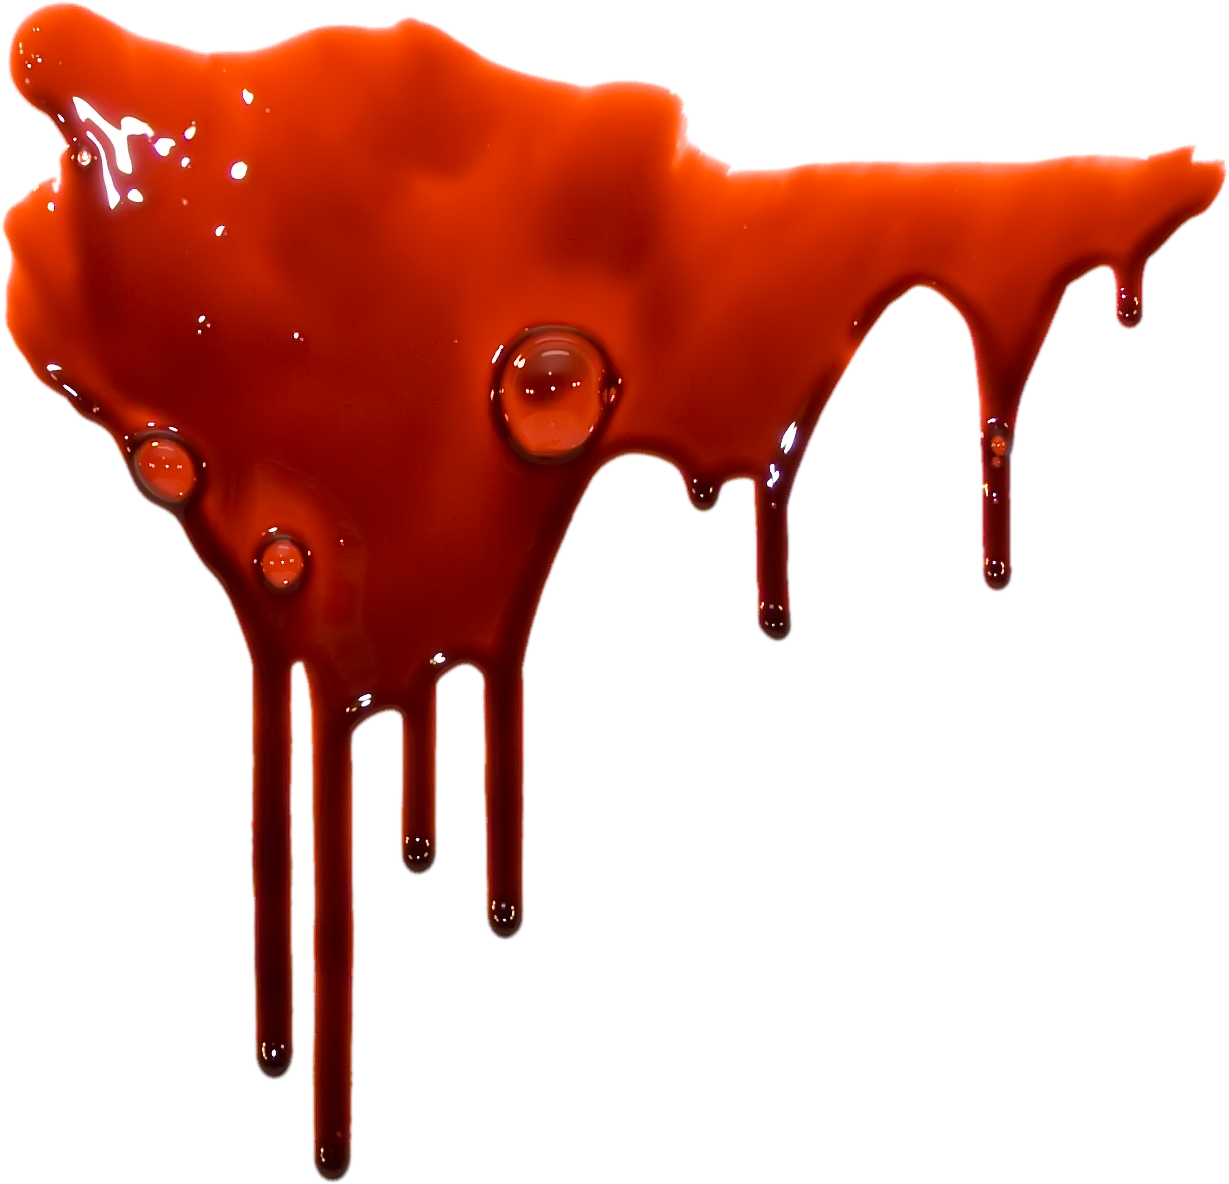 Red Blood Png Splashes Template